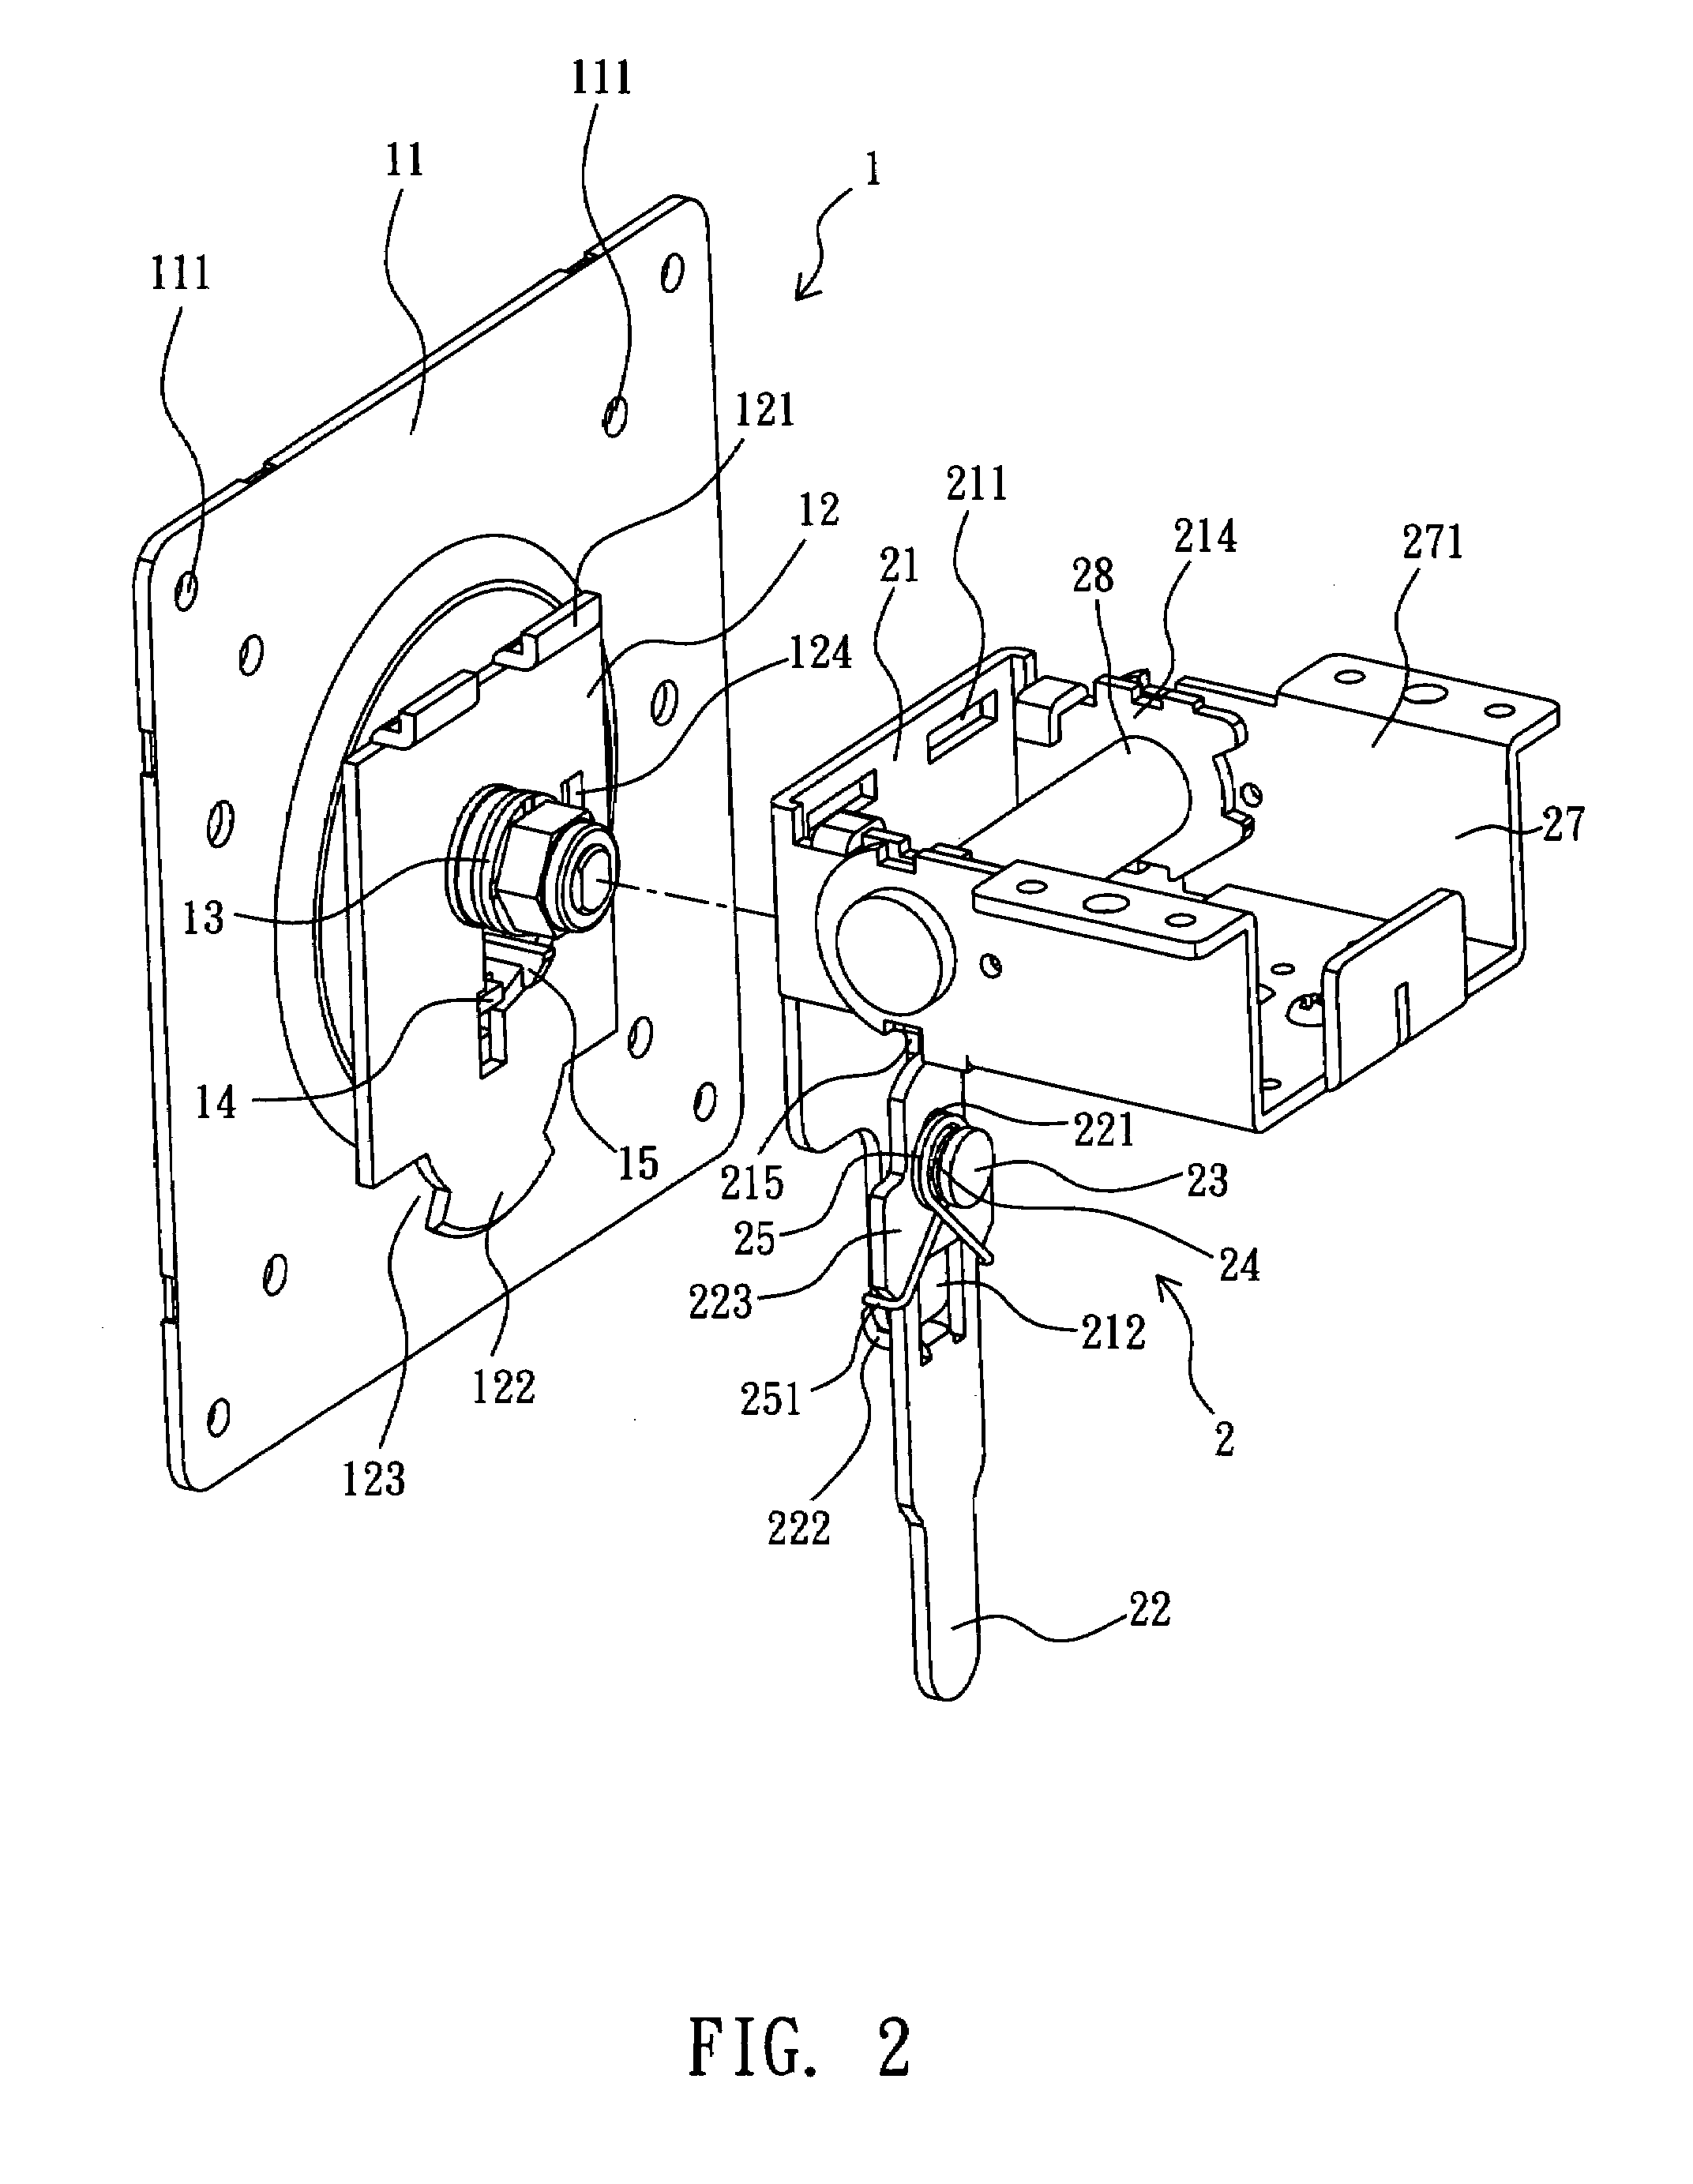 Detachable mounting assembly